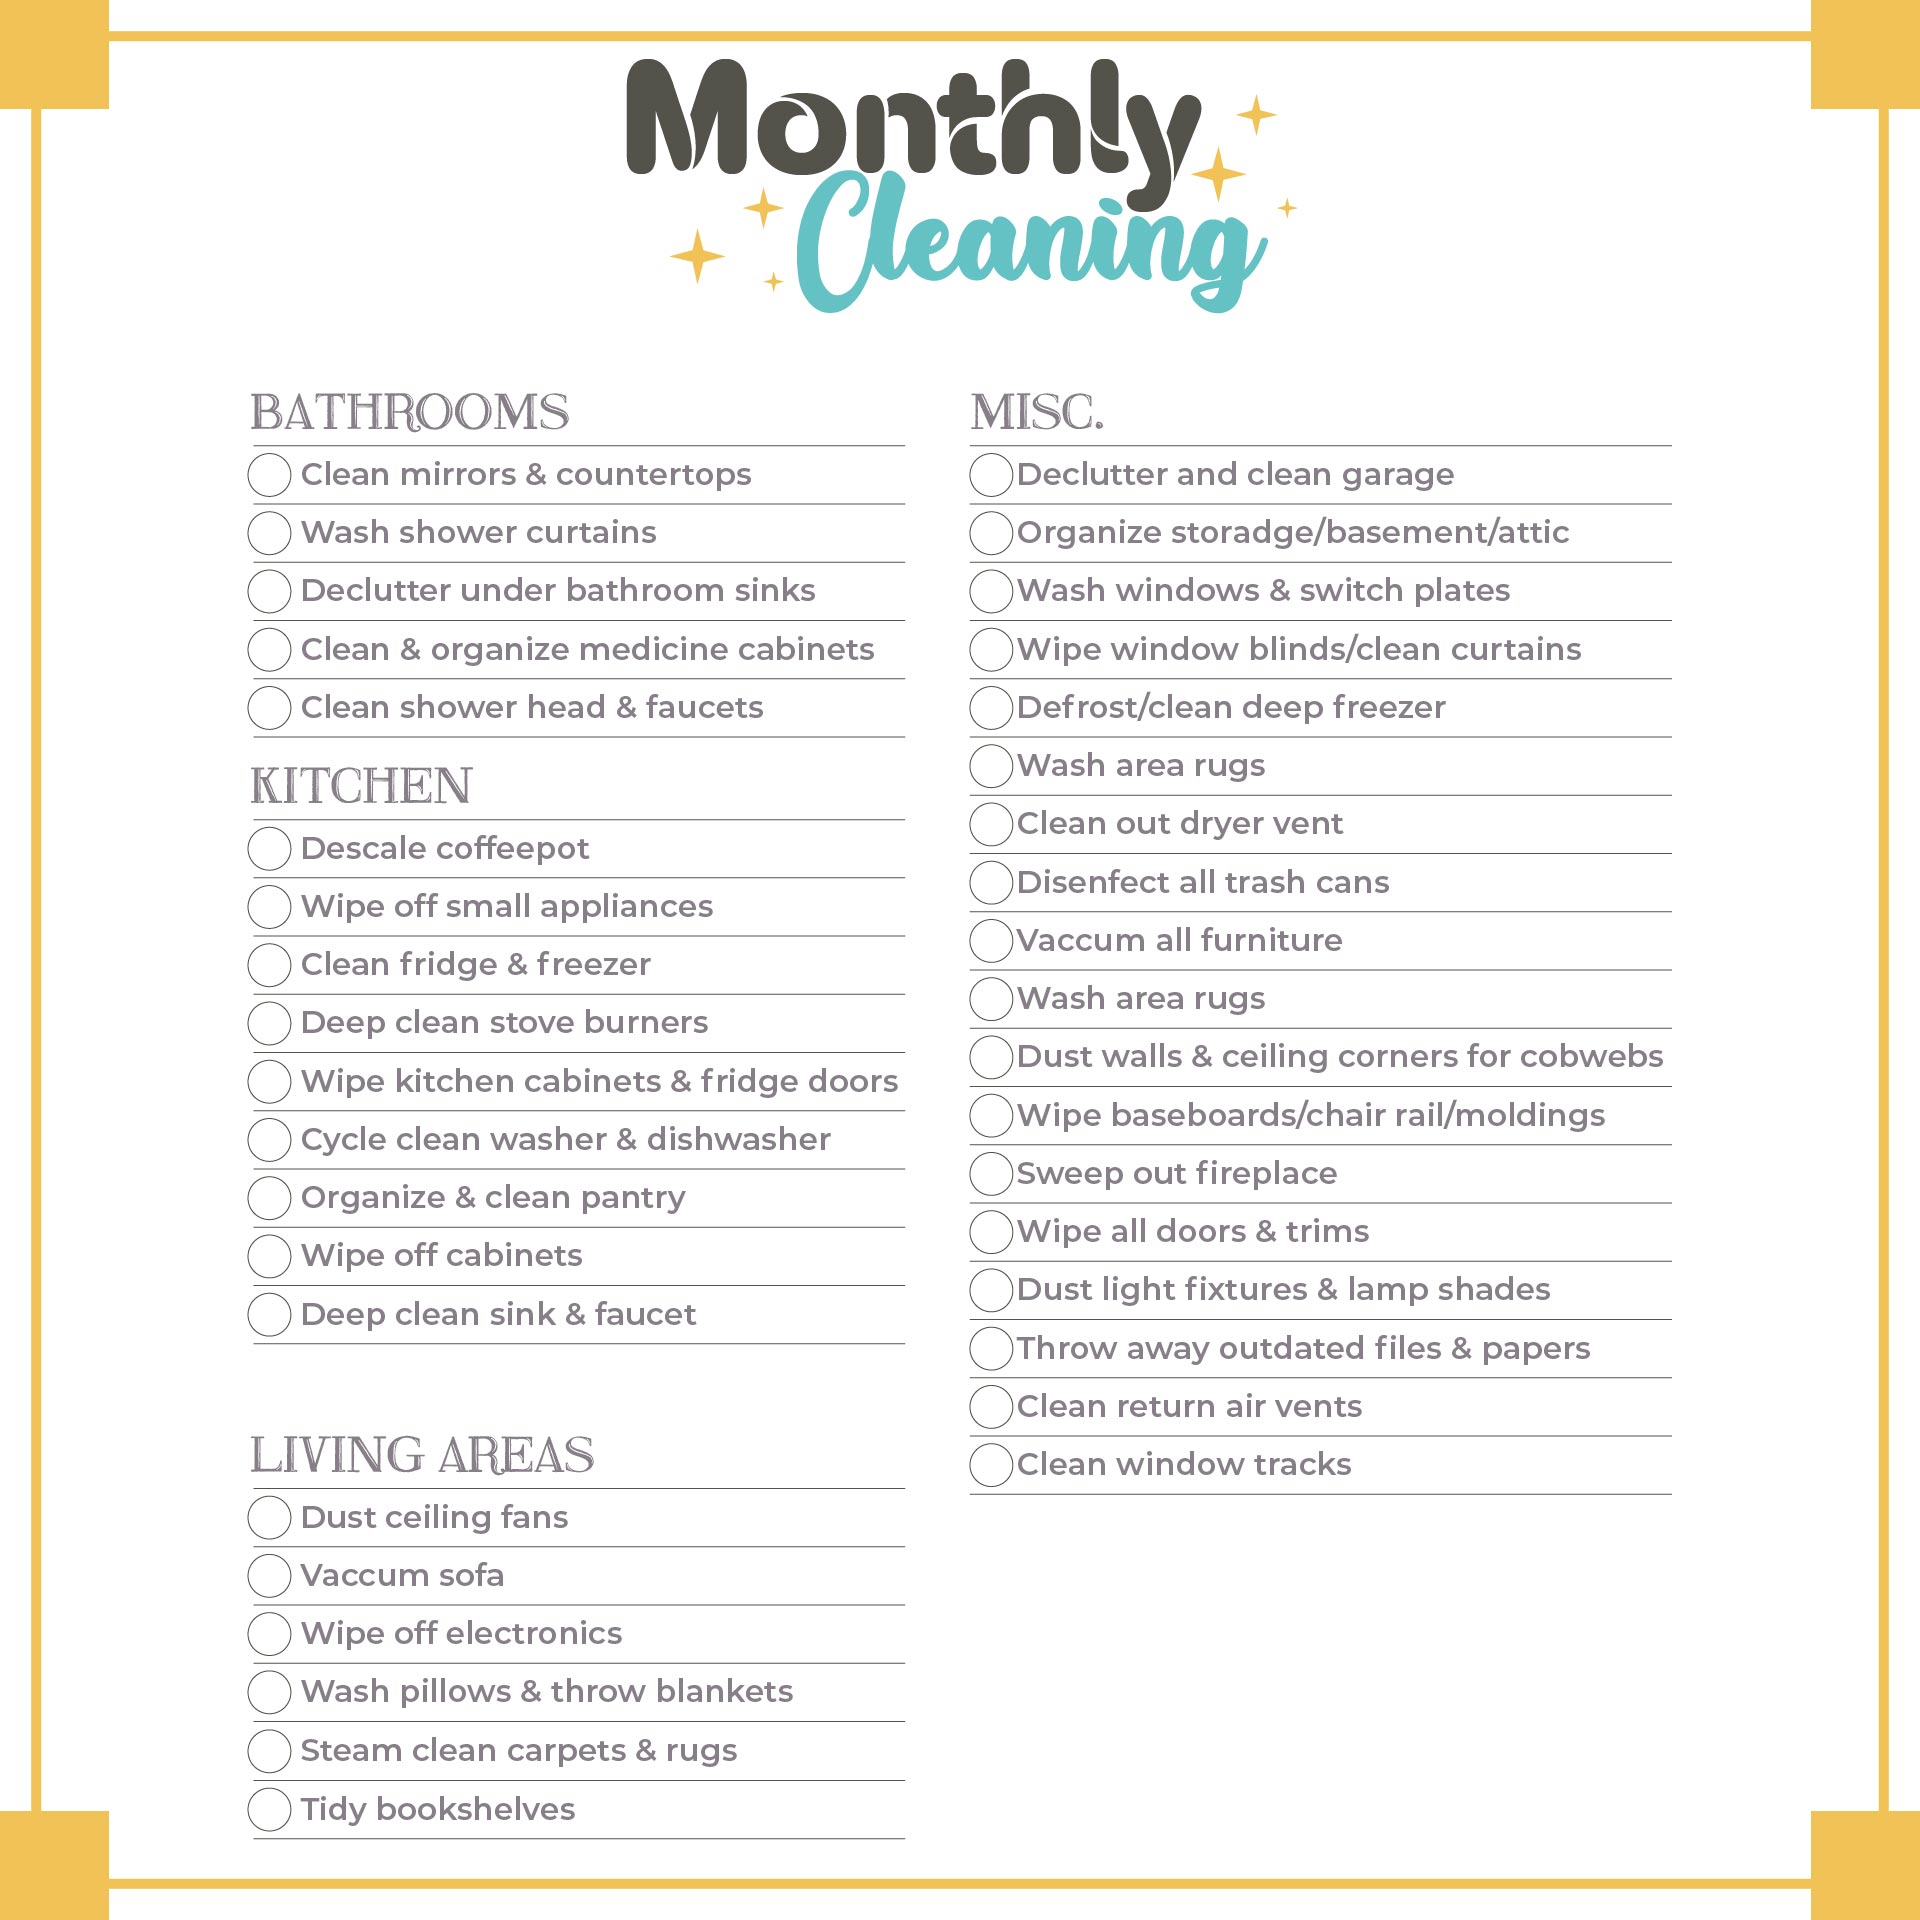 Monthly Cleaning Schedule For Home